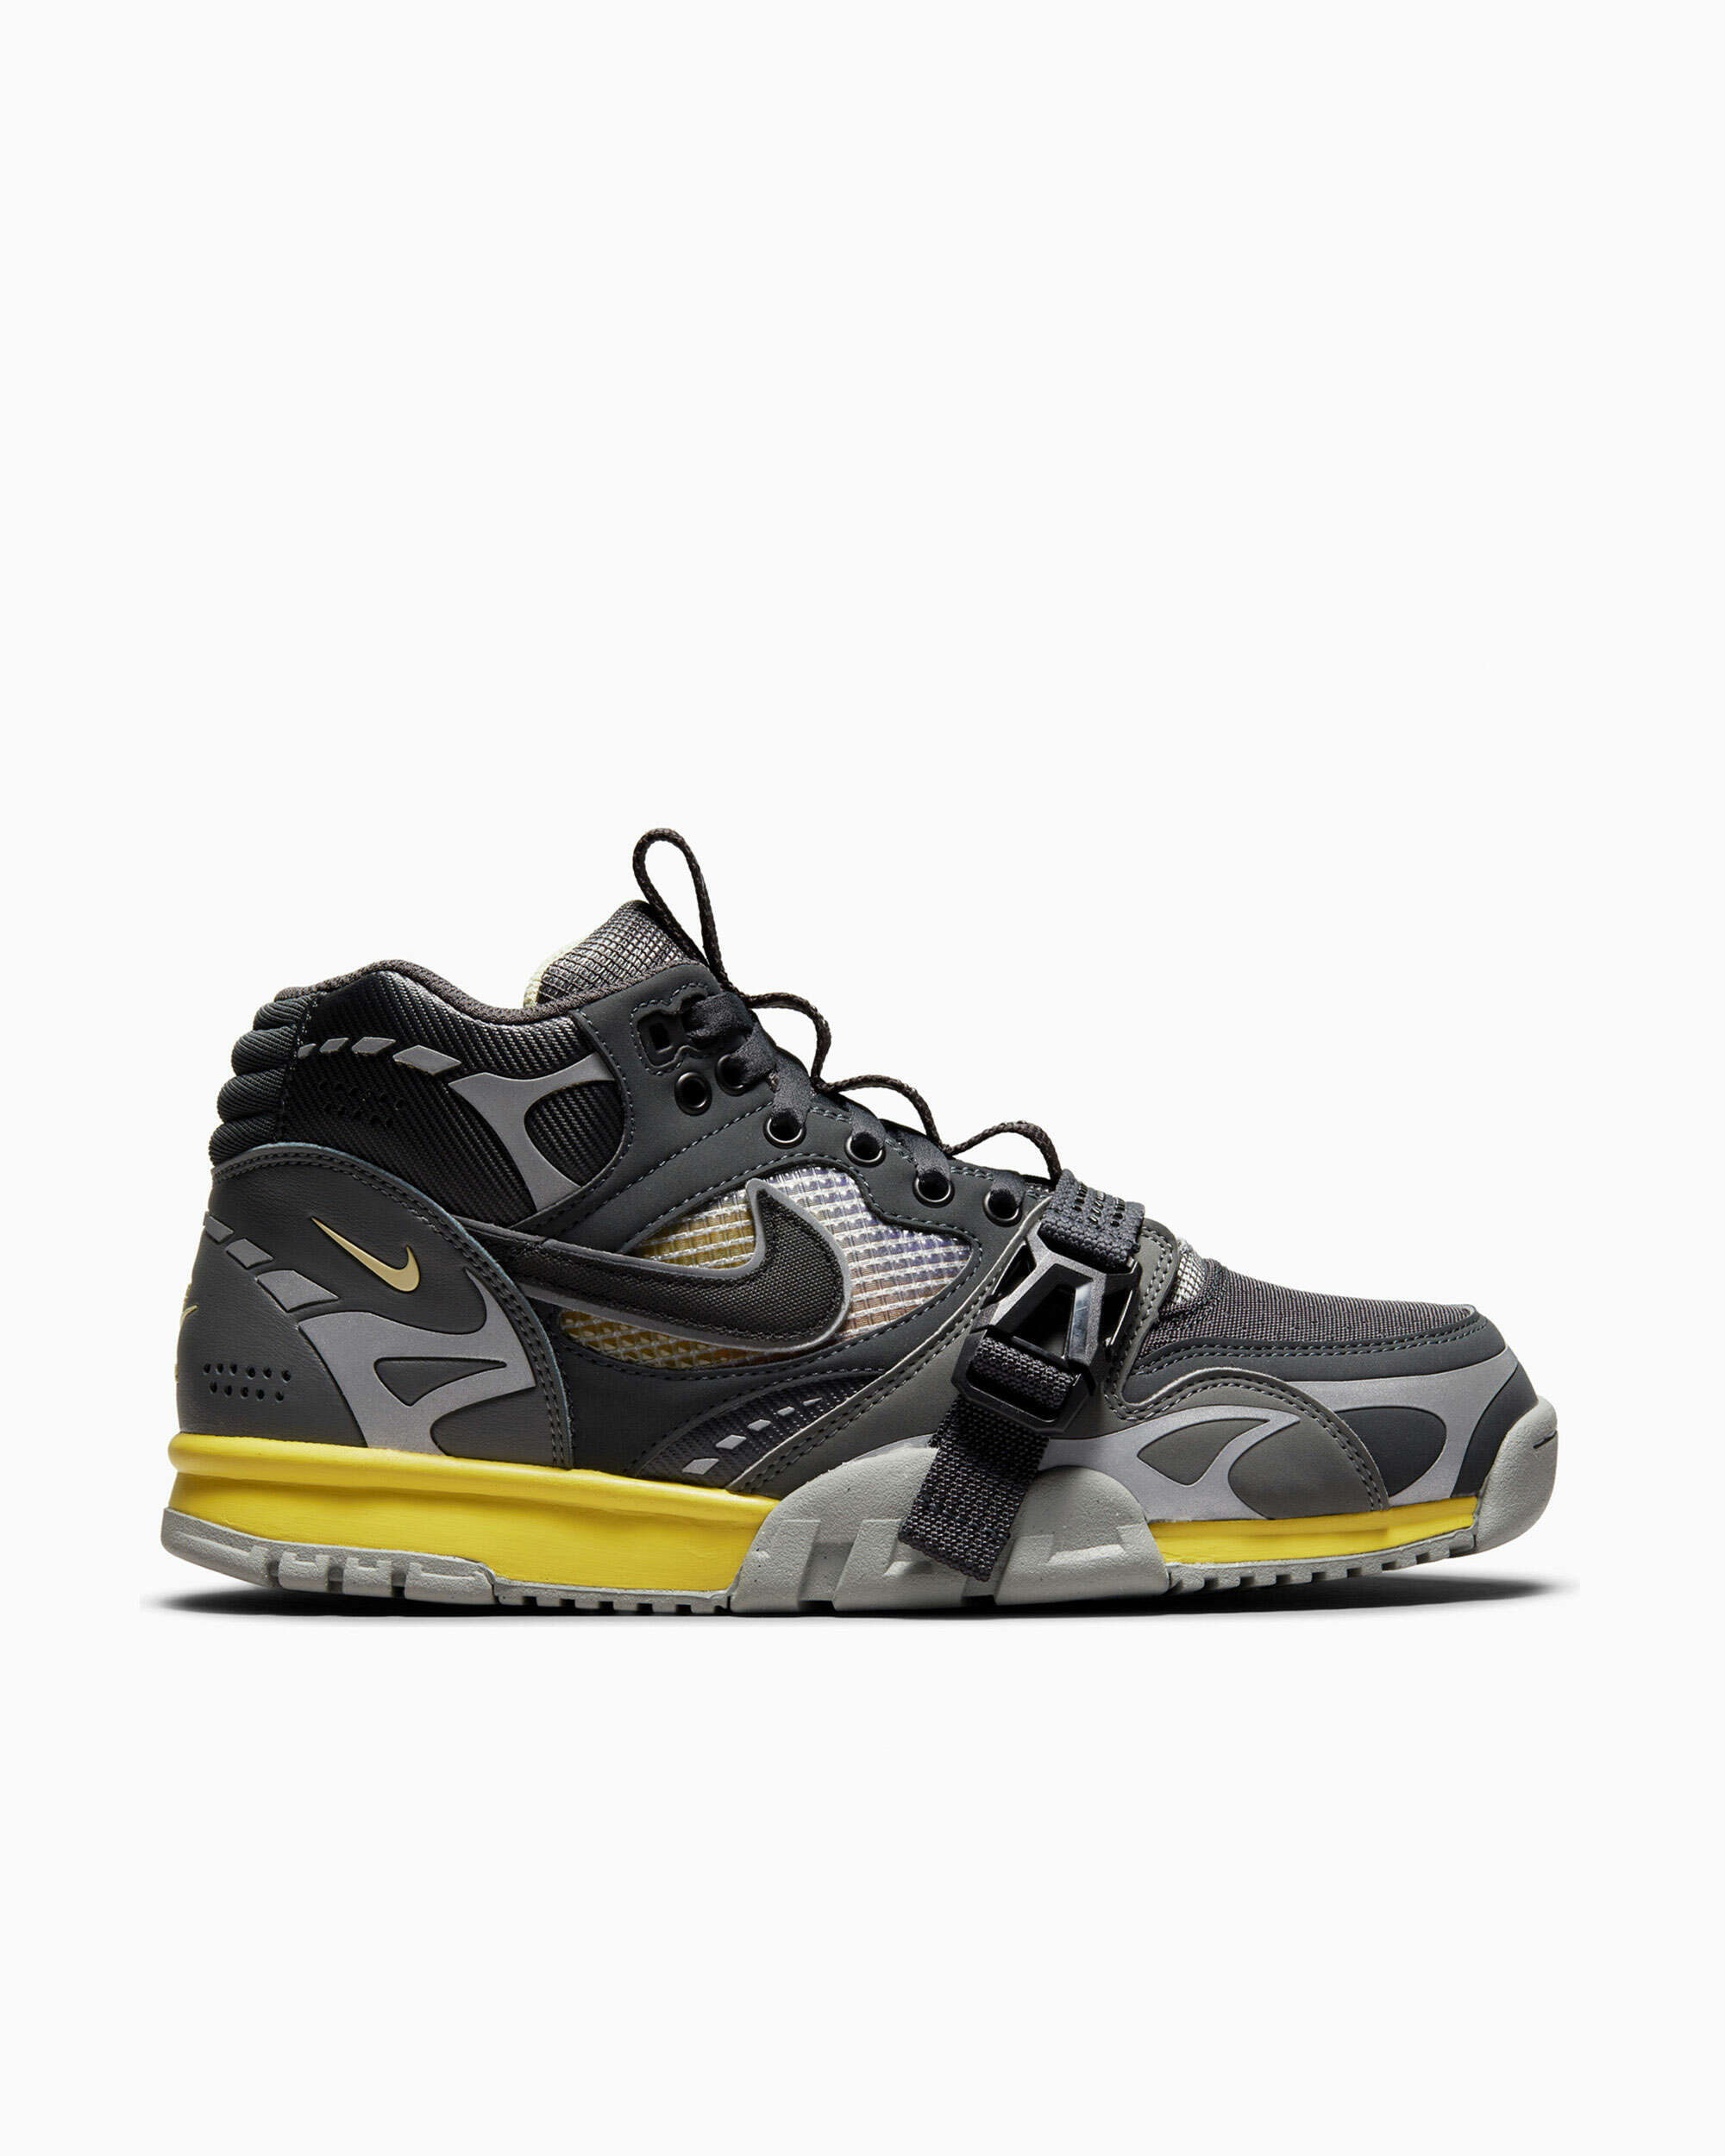 Air Trainer Utility SP "Dark Smoke Gray DH7338-001| Buy Online at FOOTDISTRICT